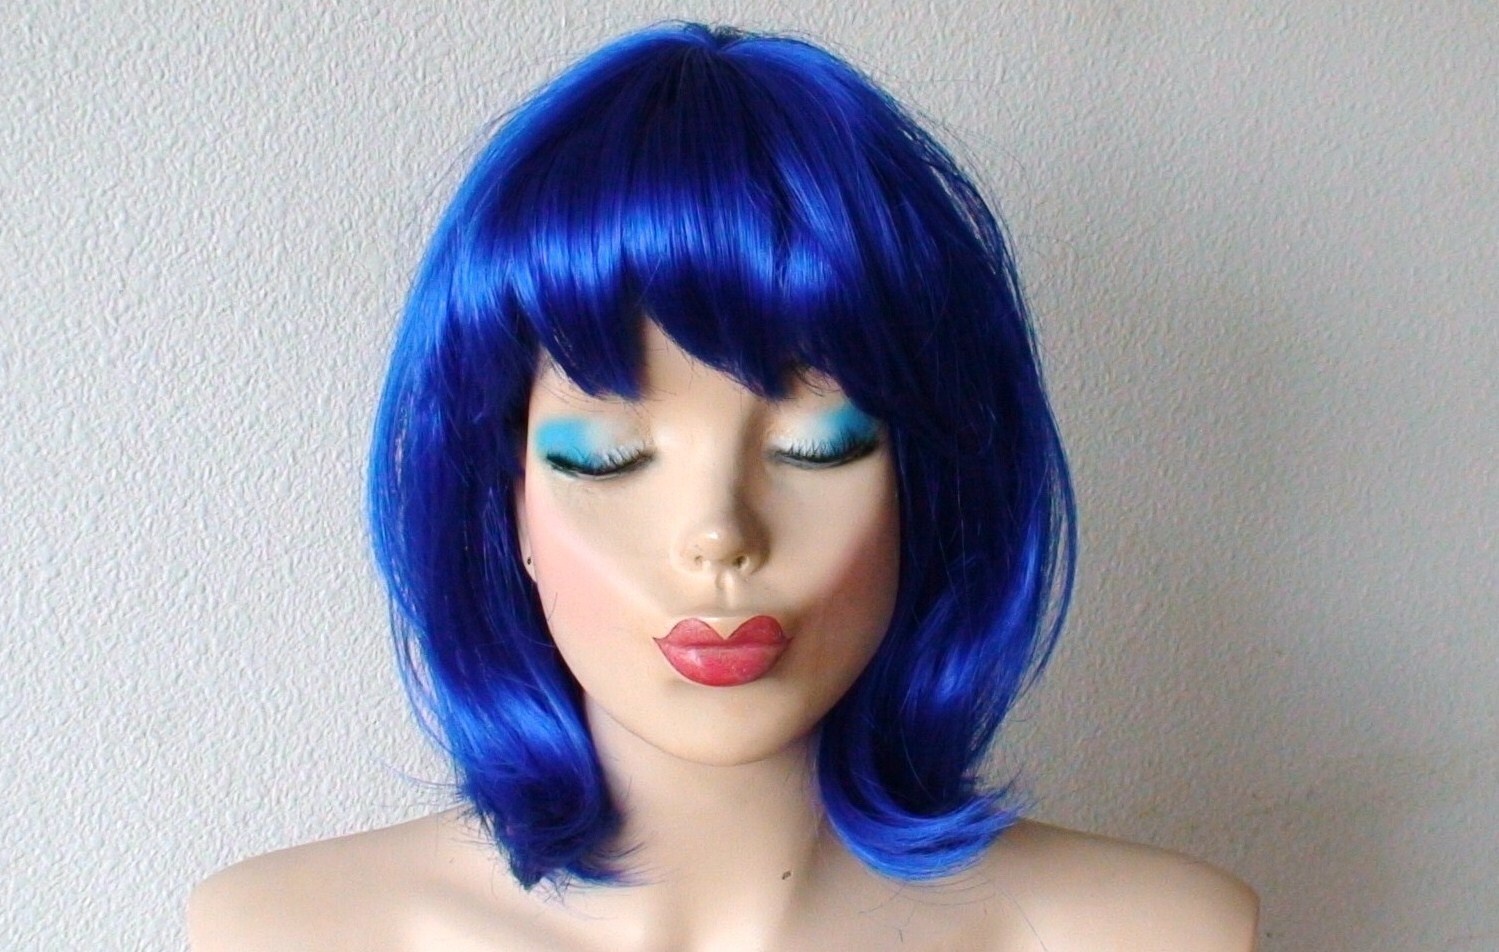 1. Light Blue Synthetic Hair Wig - wide 7